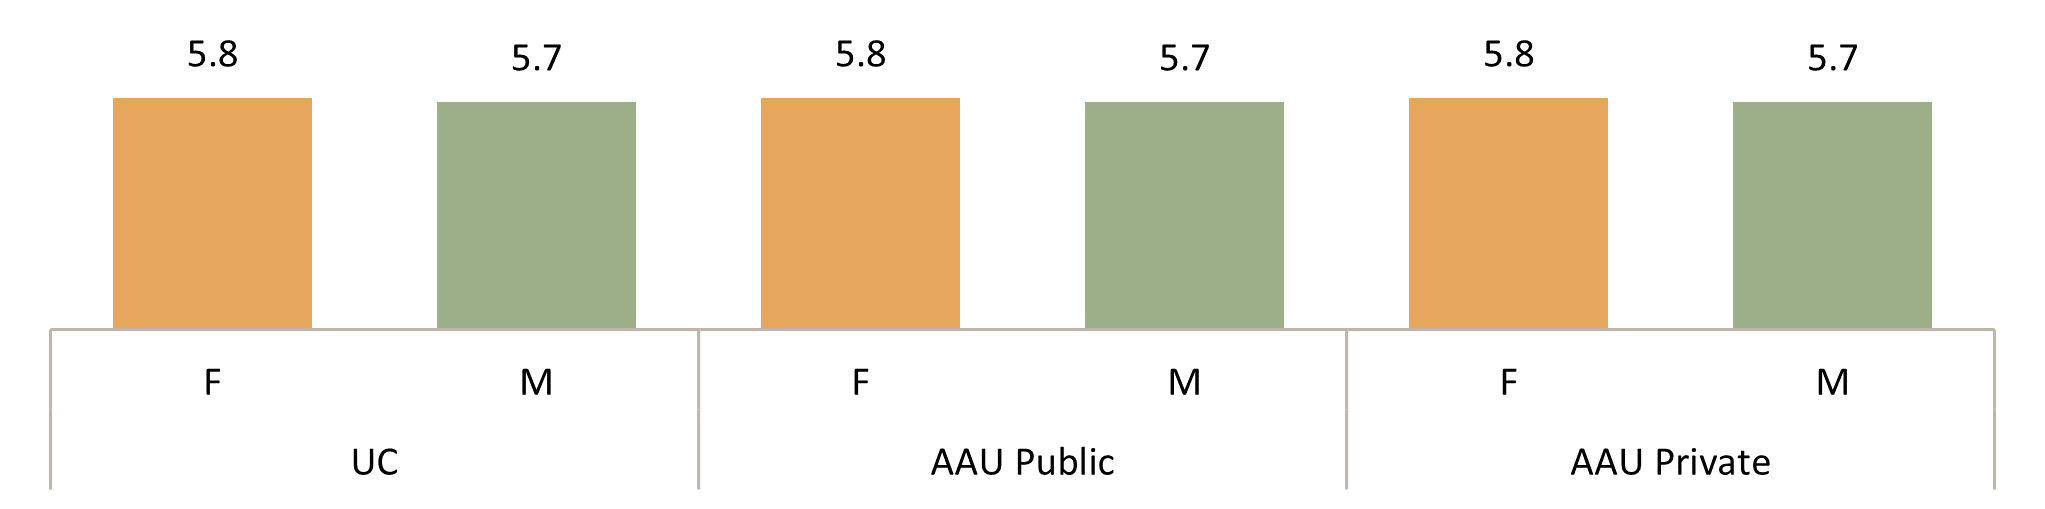 Median ten-year time-to-doctorate, by ethnicity and gender, Universitywide, AAU public and AAU private comparison institutions